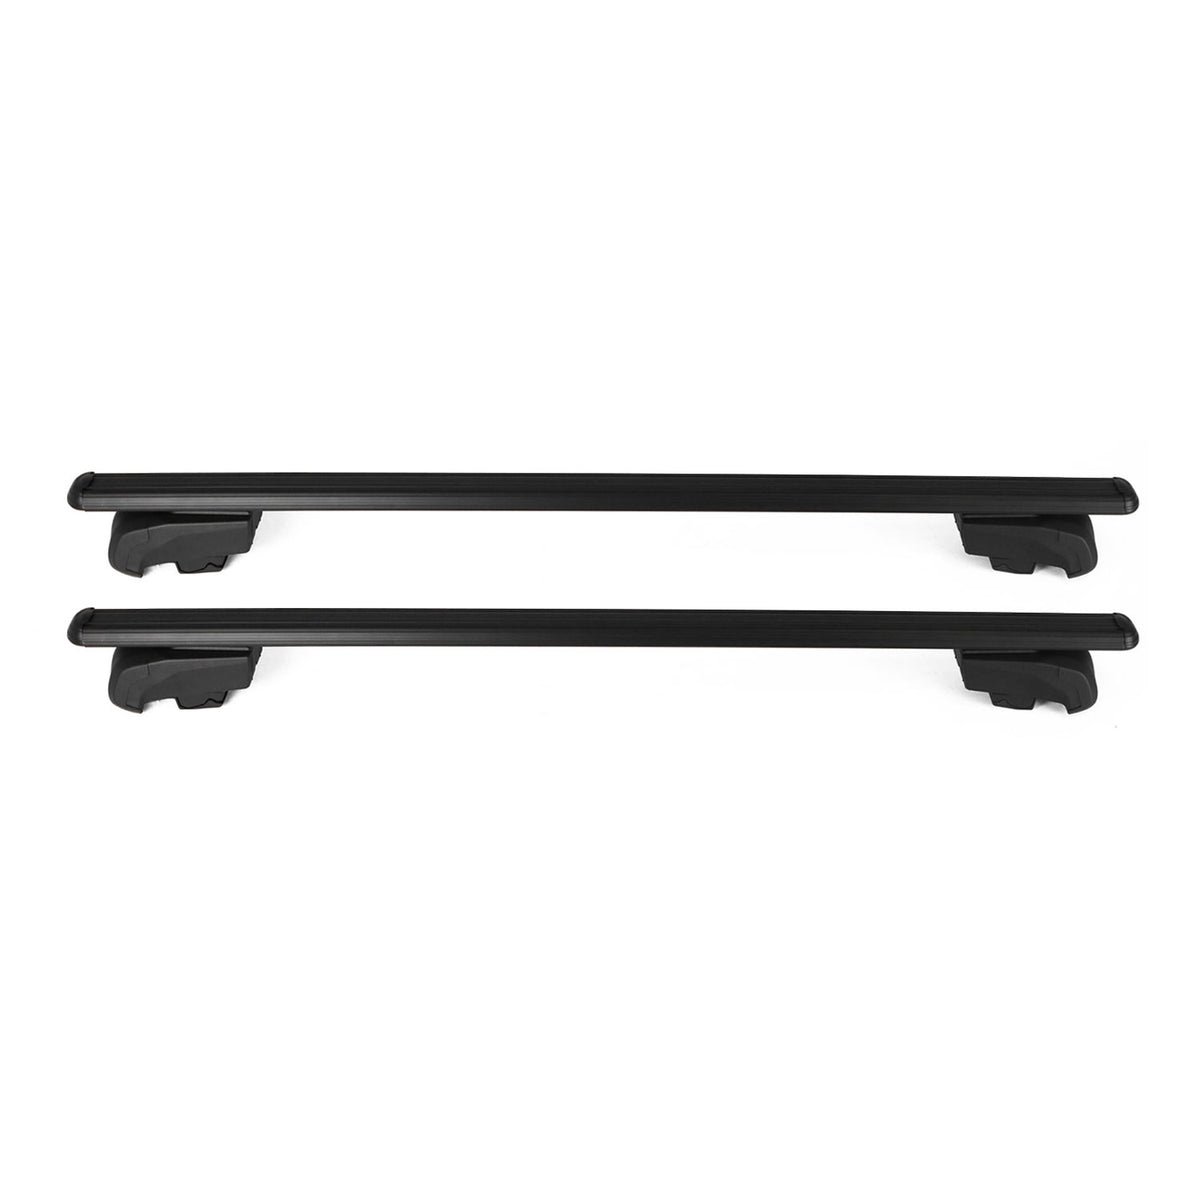 Roof rack luggage rack for BMW 5 Series G31 Touring 2017-2023 TÜV ABE aluminum black 2x